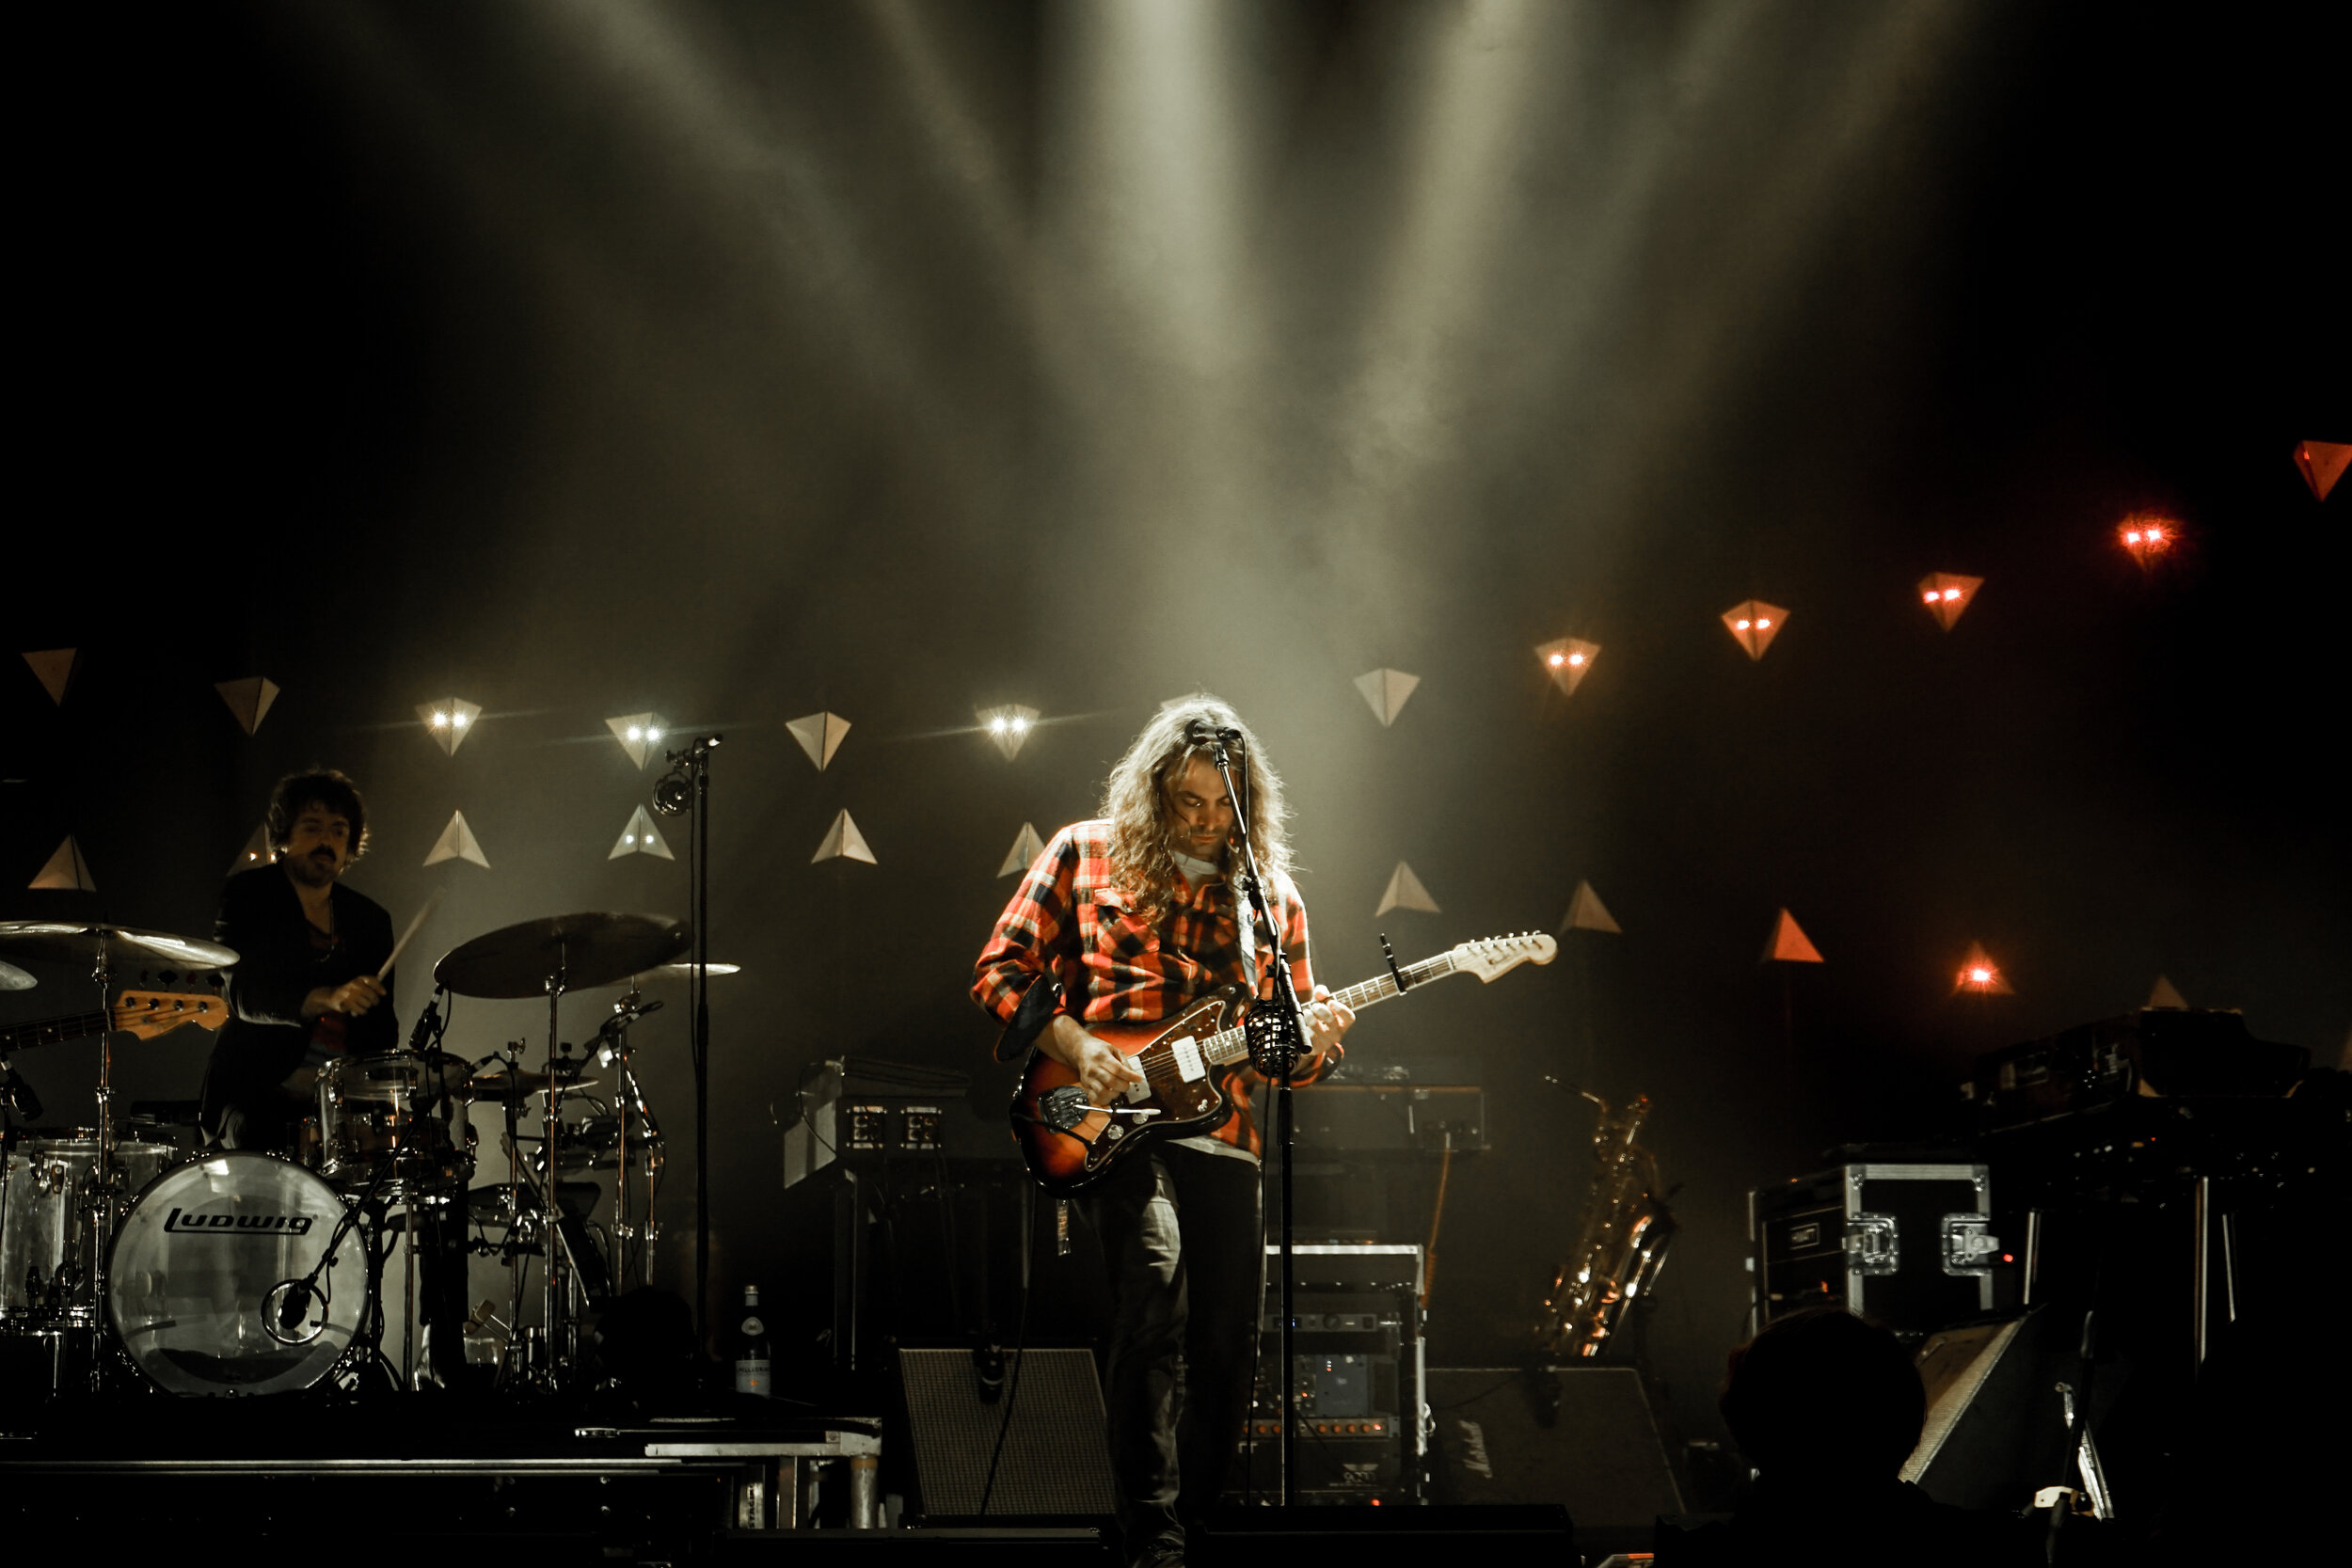   The War on Drugs @ Moore Theater, Seattle    October 2017 